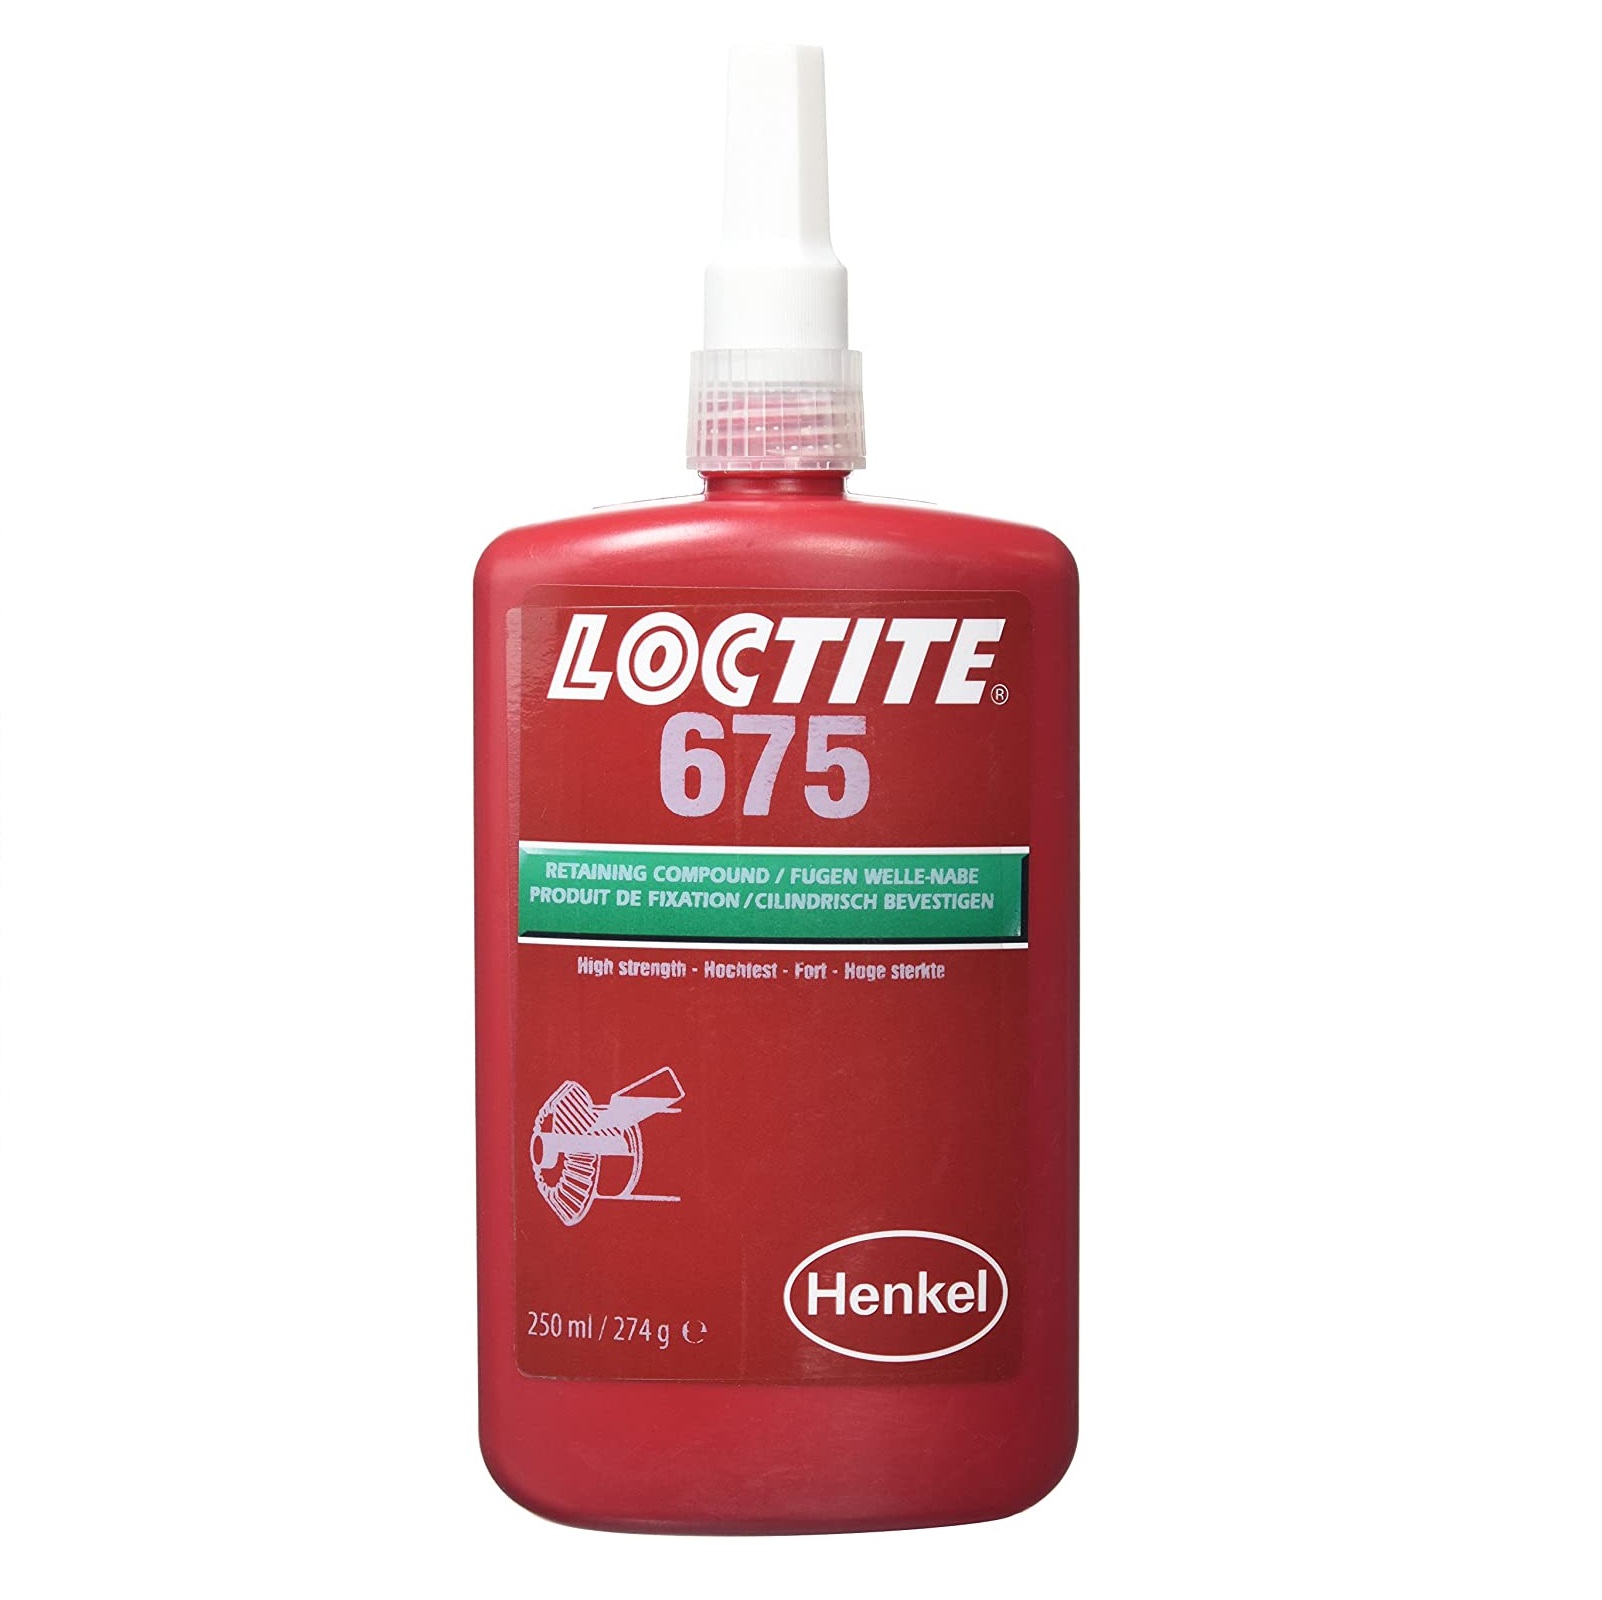 Loctite 675 High Strength Low Viscosity Slow Cure Retaining Compound 250ml image 2